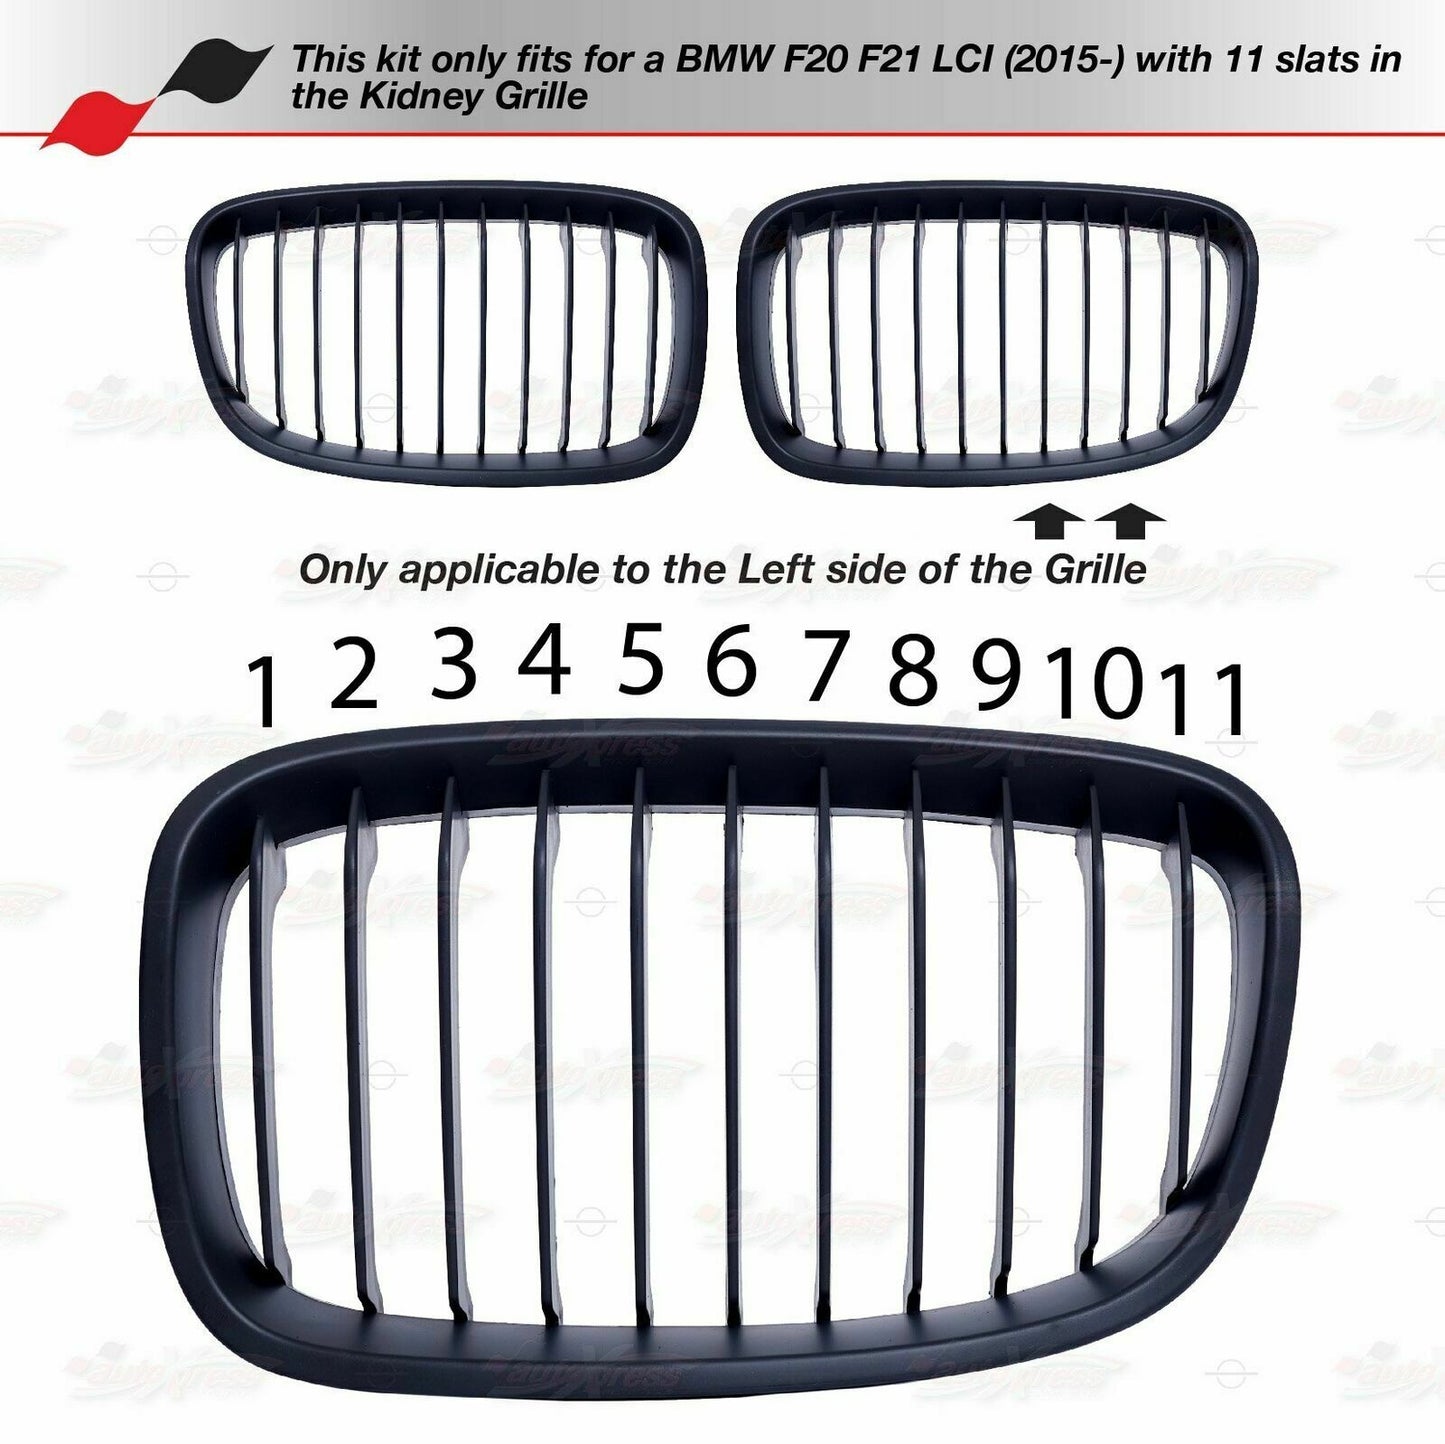 M-Tech 11 Slat Kidney Grille Color Cover Clip for BMW 1 Series F20 F21 LCI 15-18